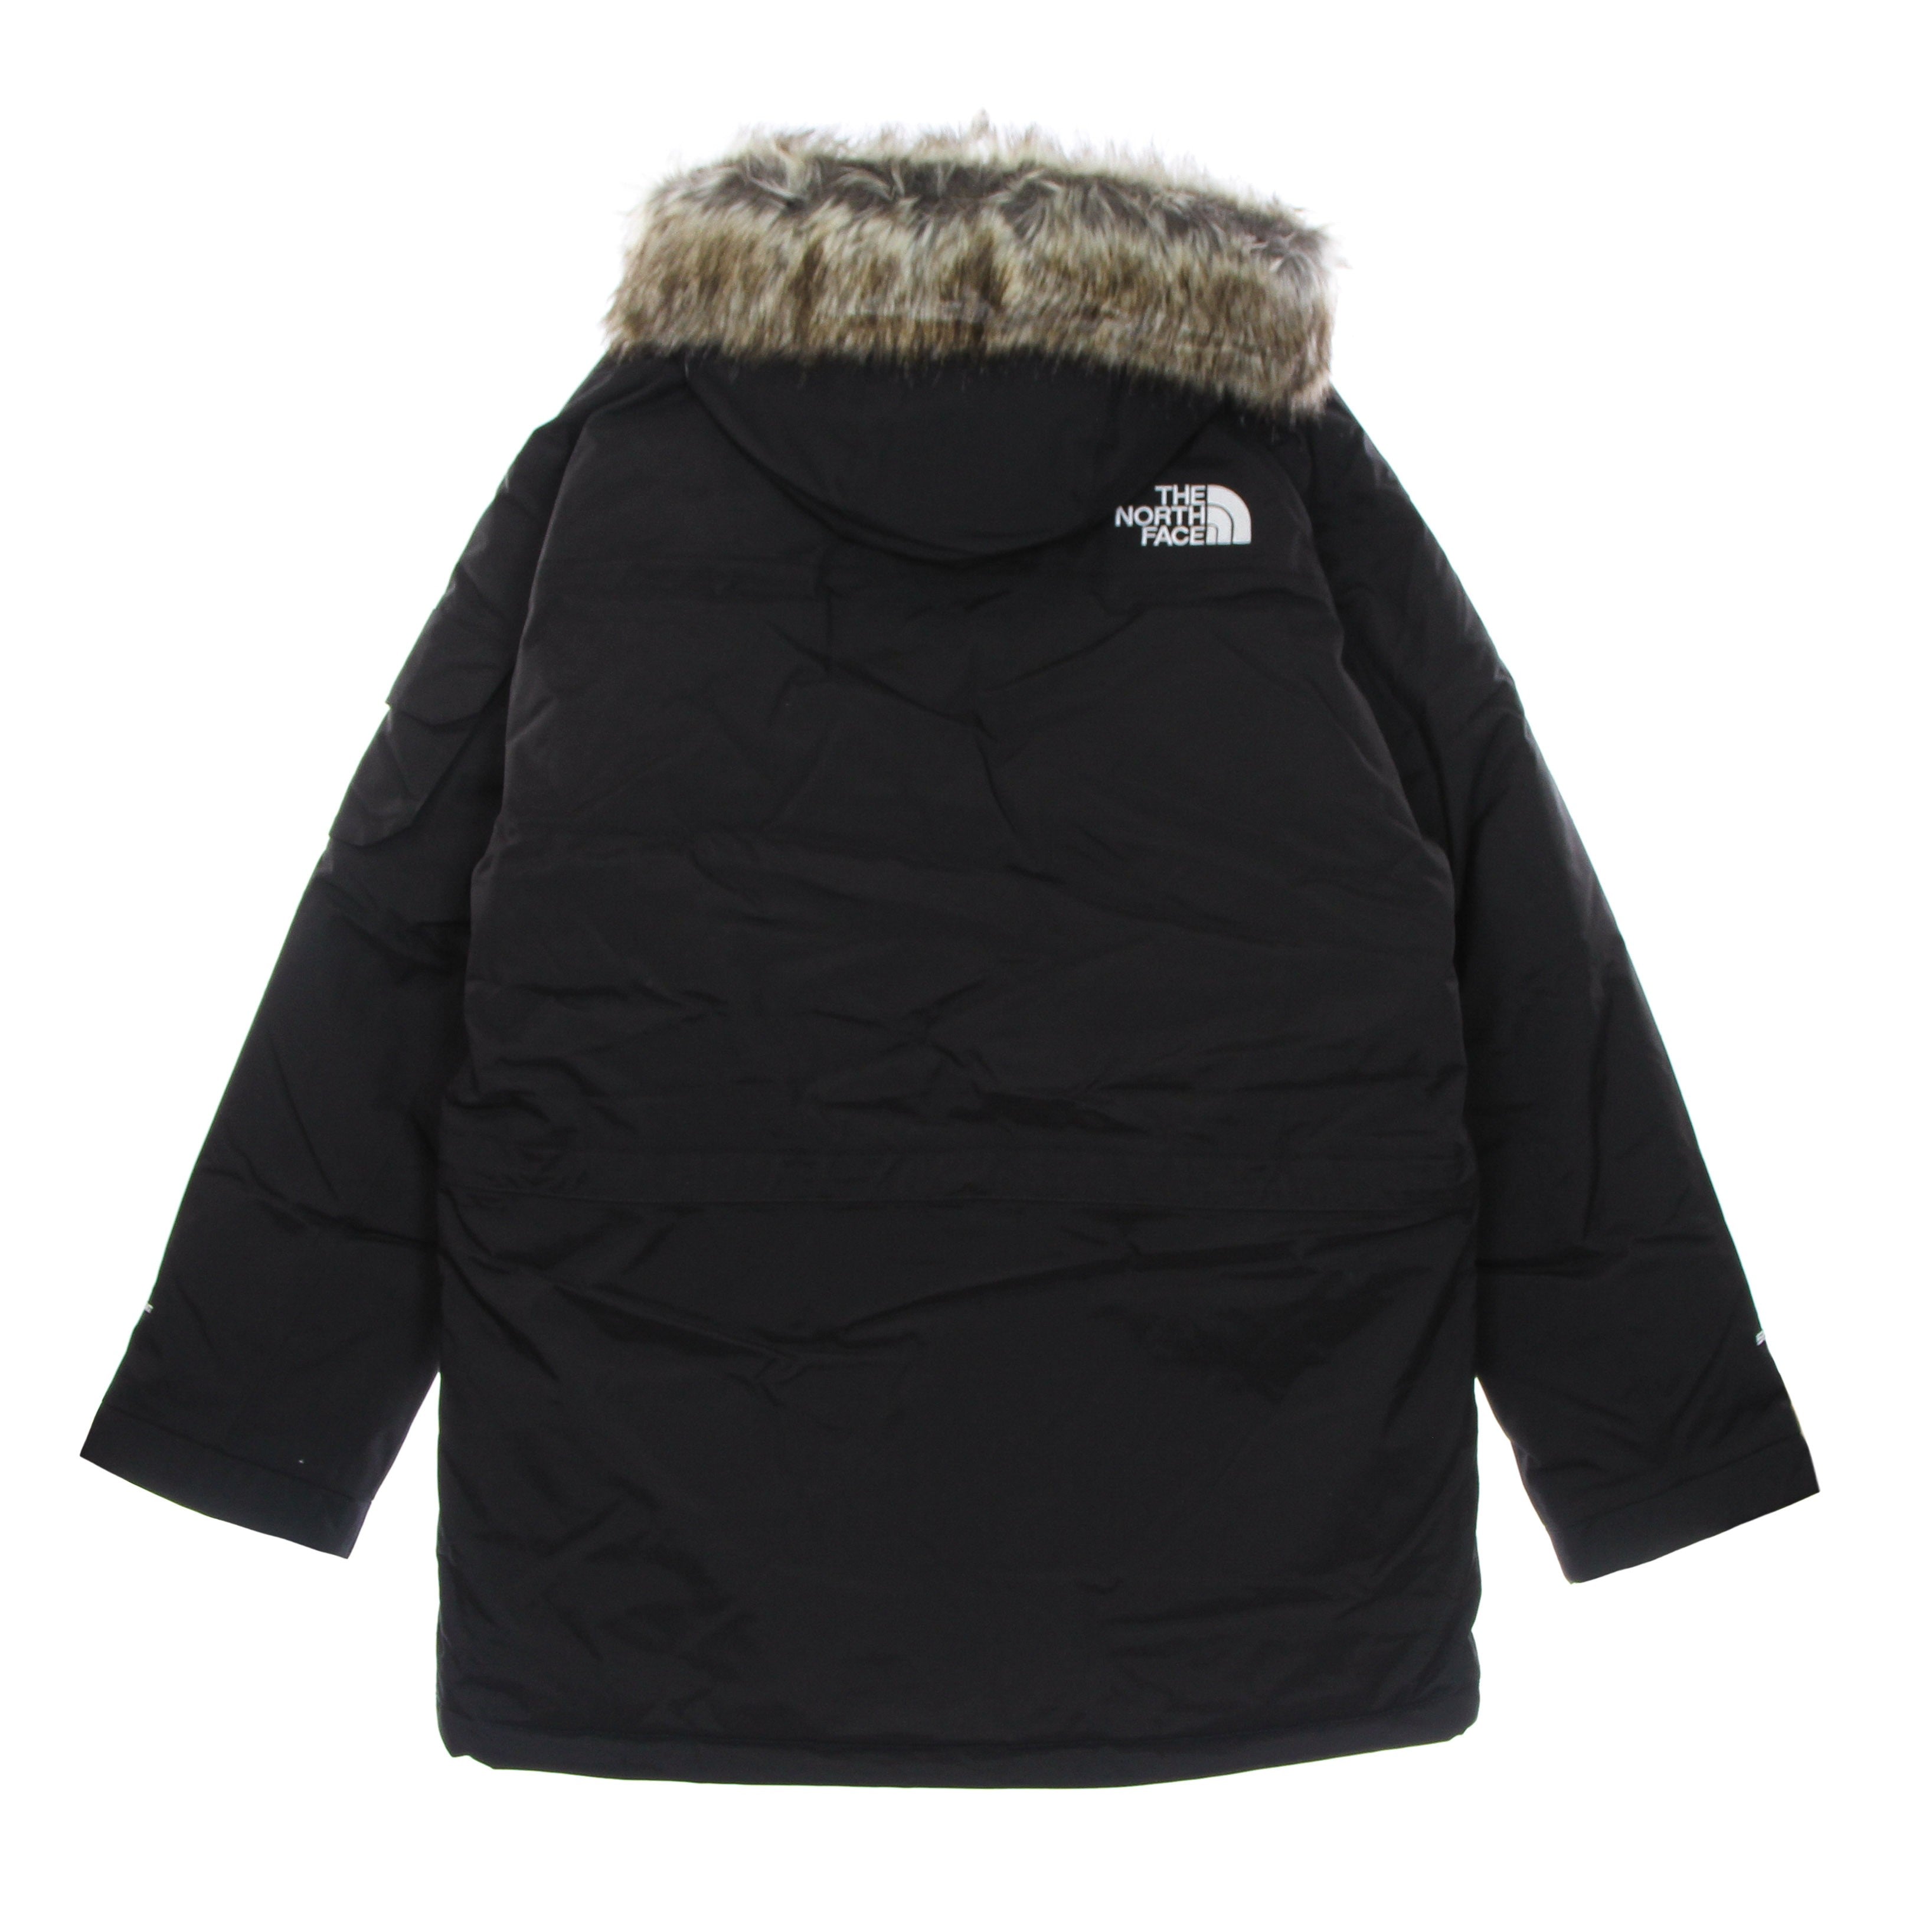 The North Face, Giaccone Lungo Uomo Recycled Mcmurdo Jacket, 